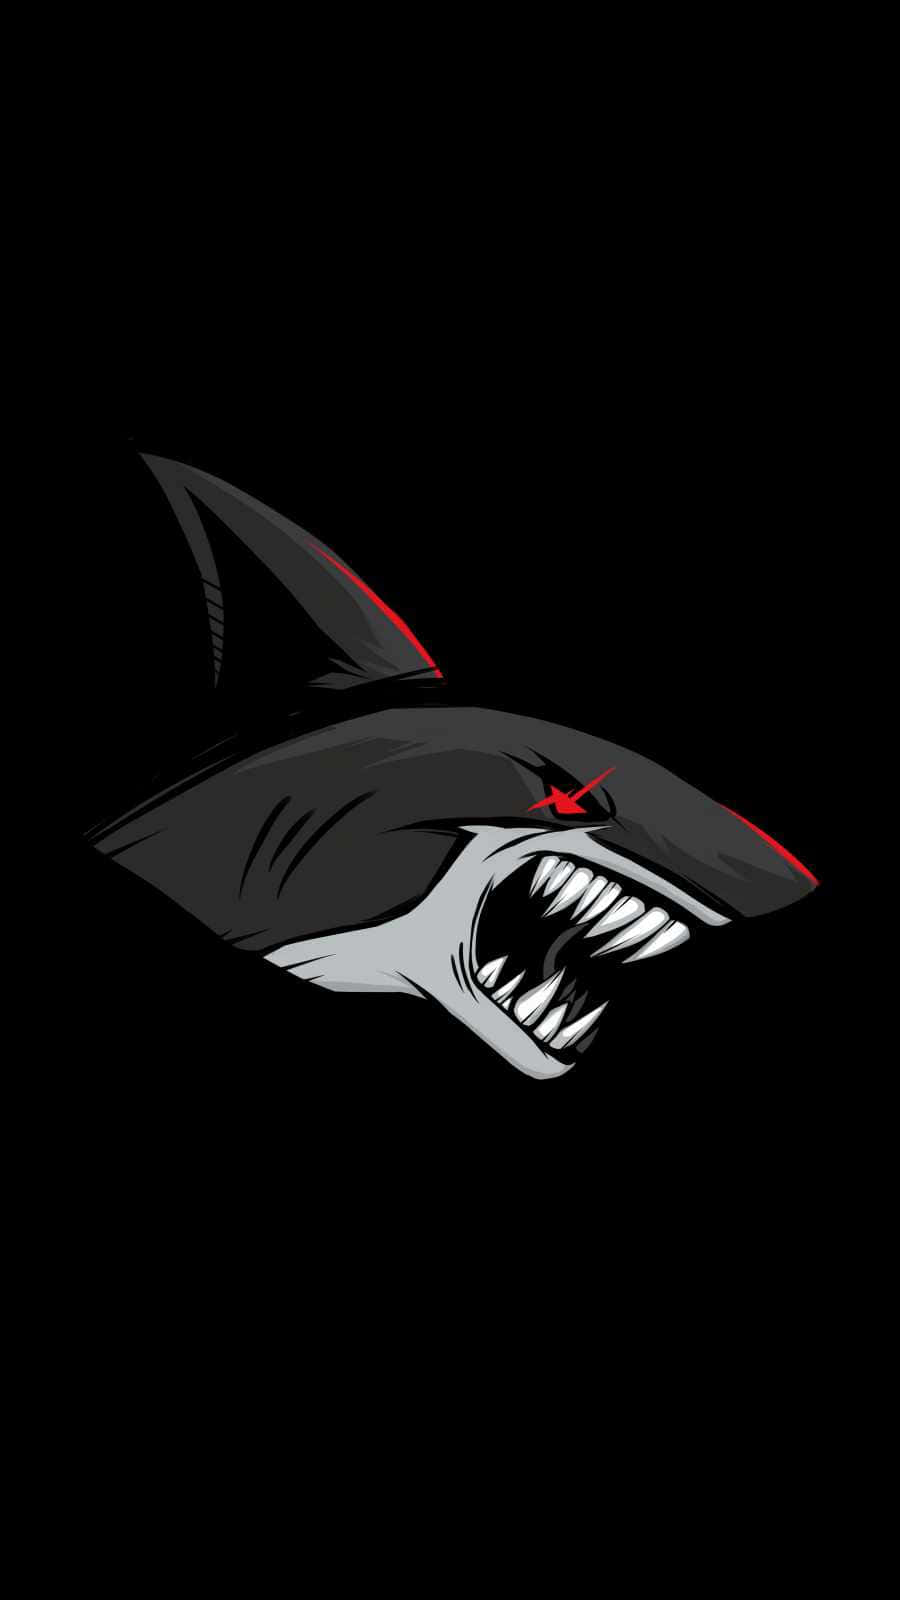 A Shark With A Red Mouth On A Black Background Wallpaper